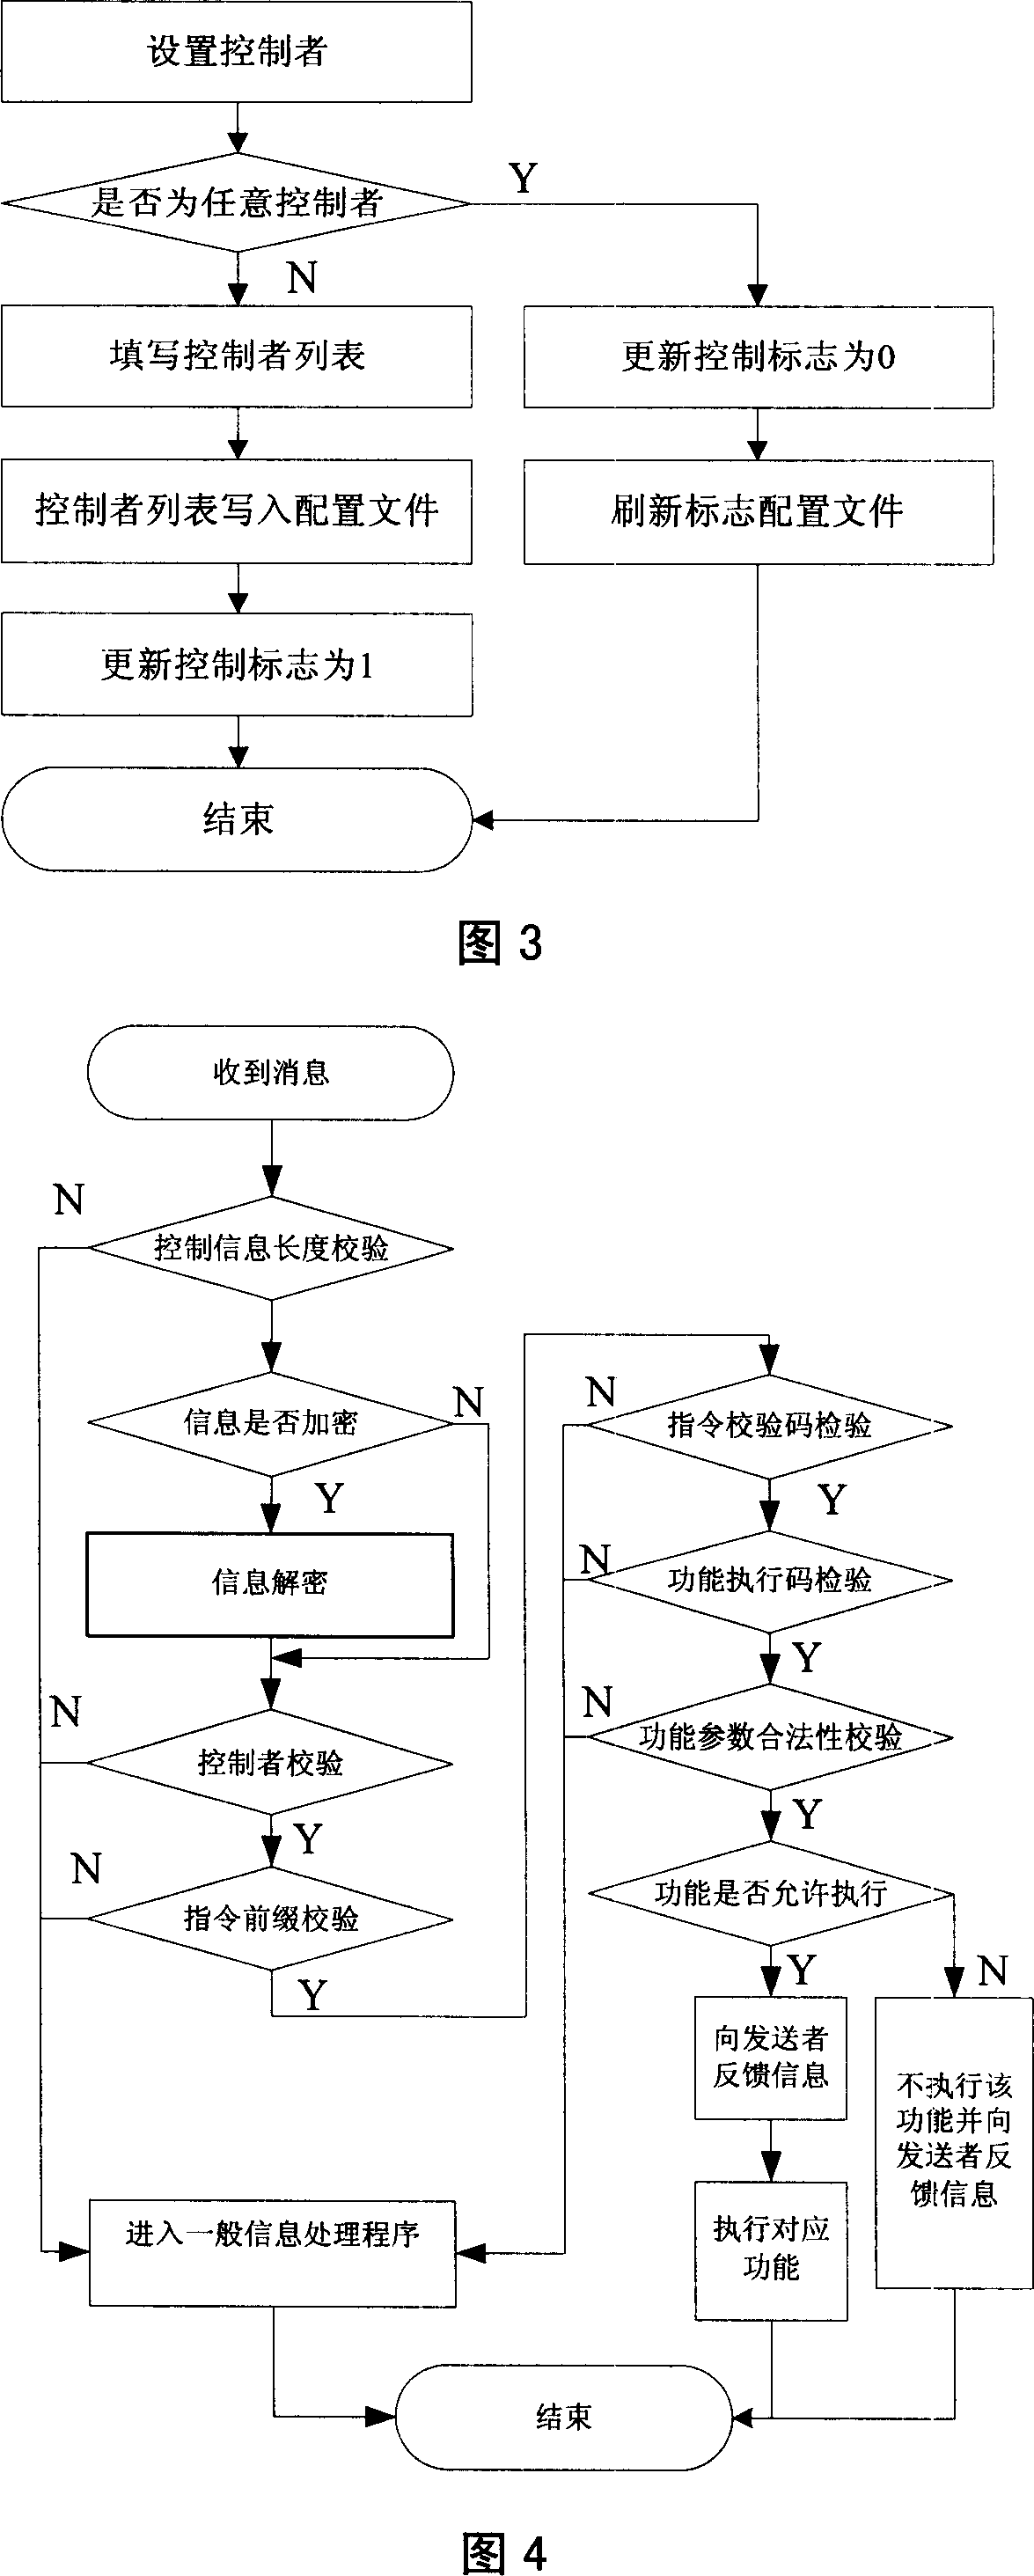 Mobile terminal with long-range control function and its long-range control method